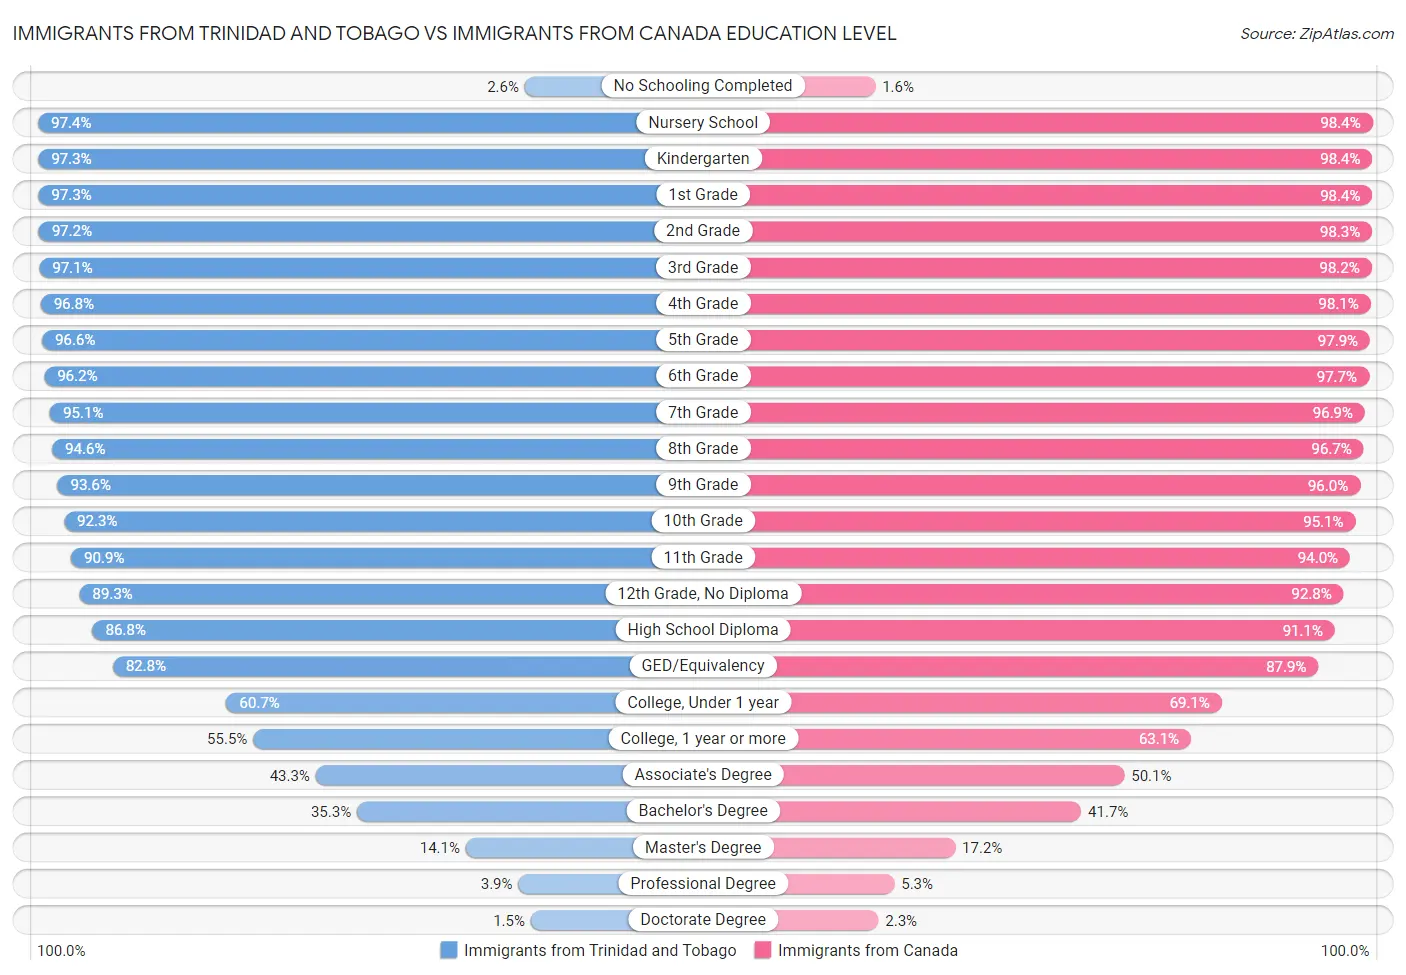 Immigrants from Trinidad and Tobago vs Immigrants from Canada Education Level